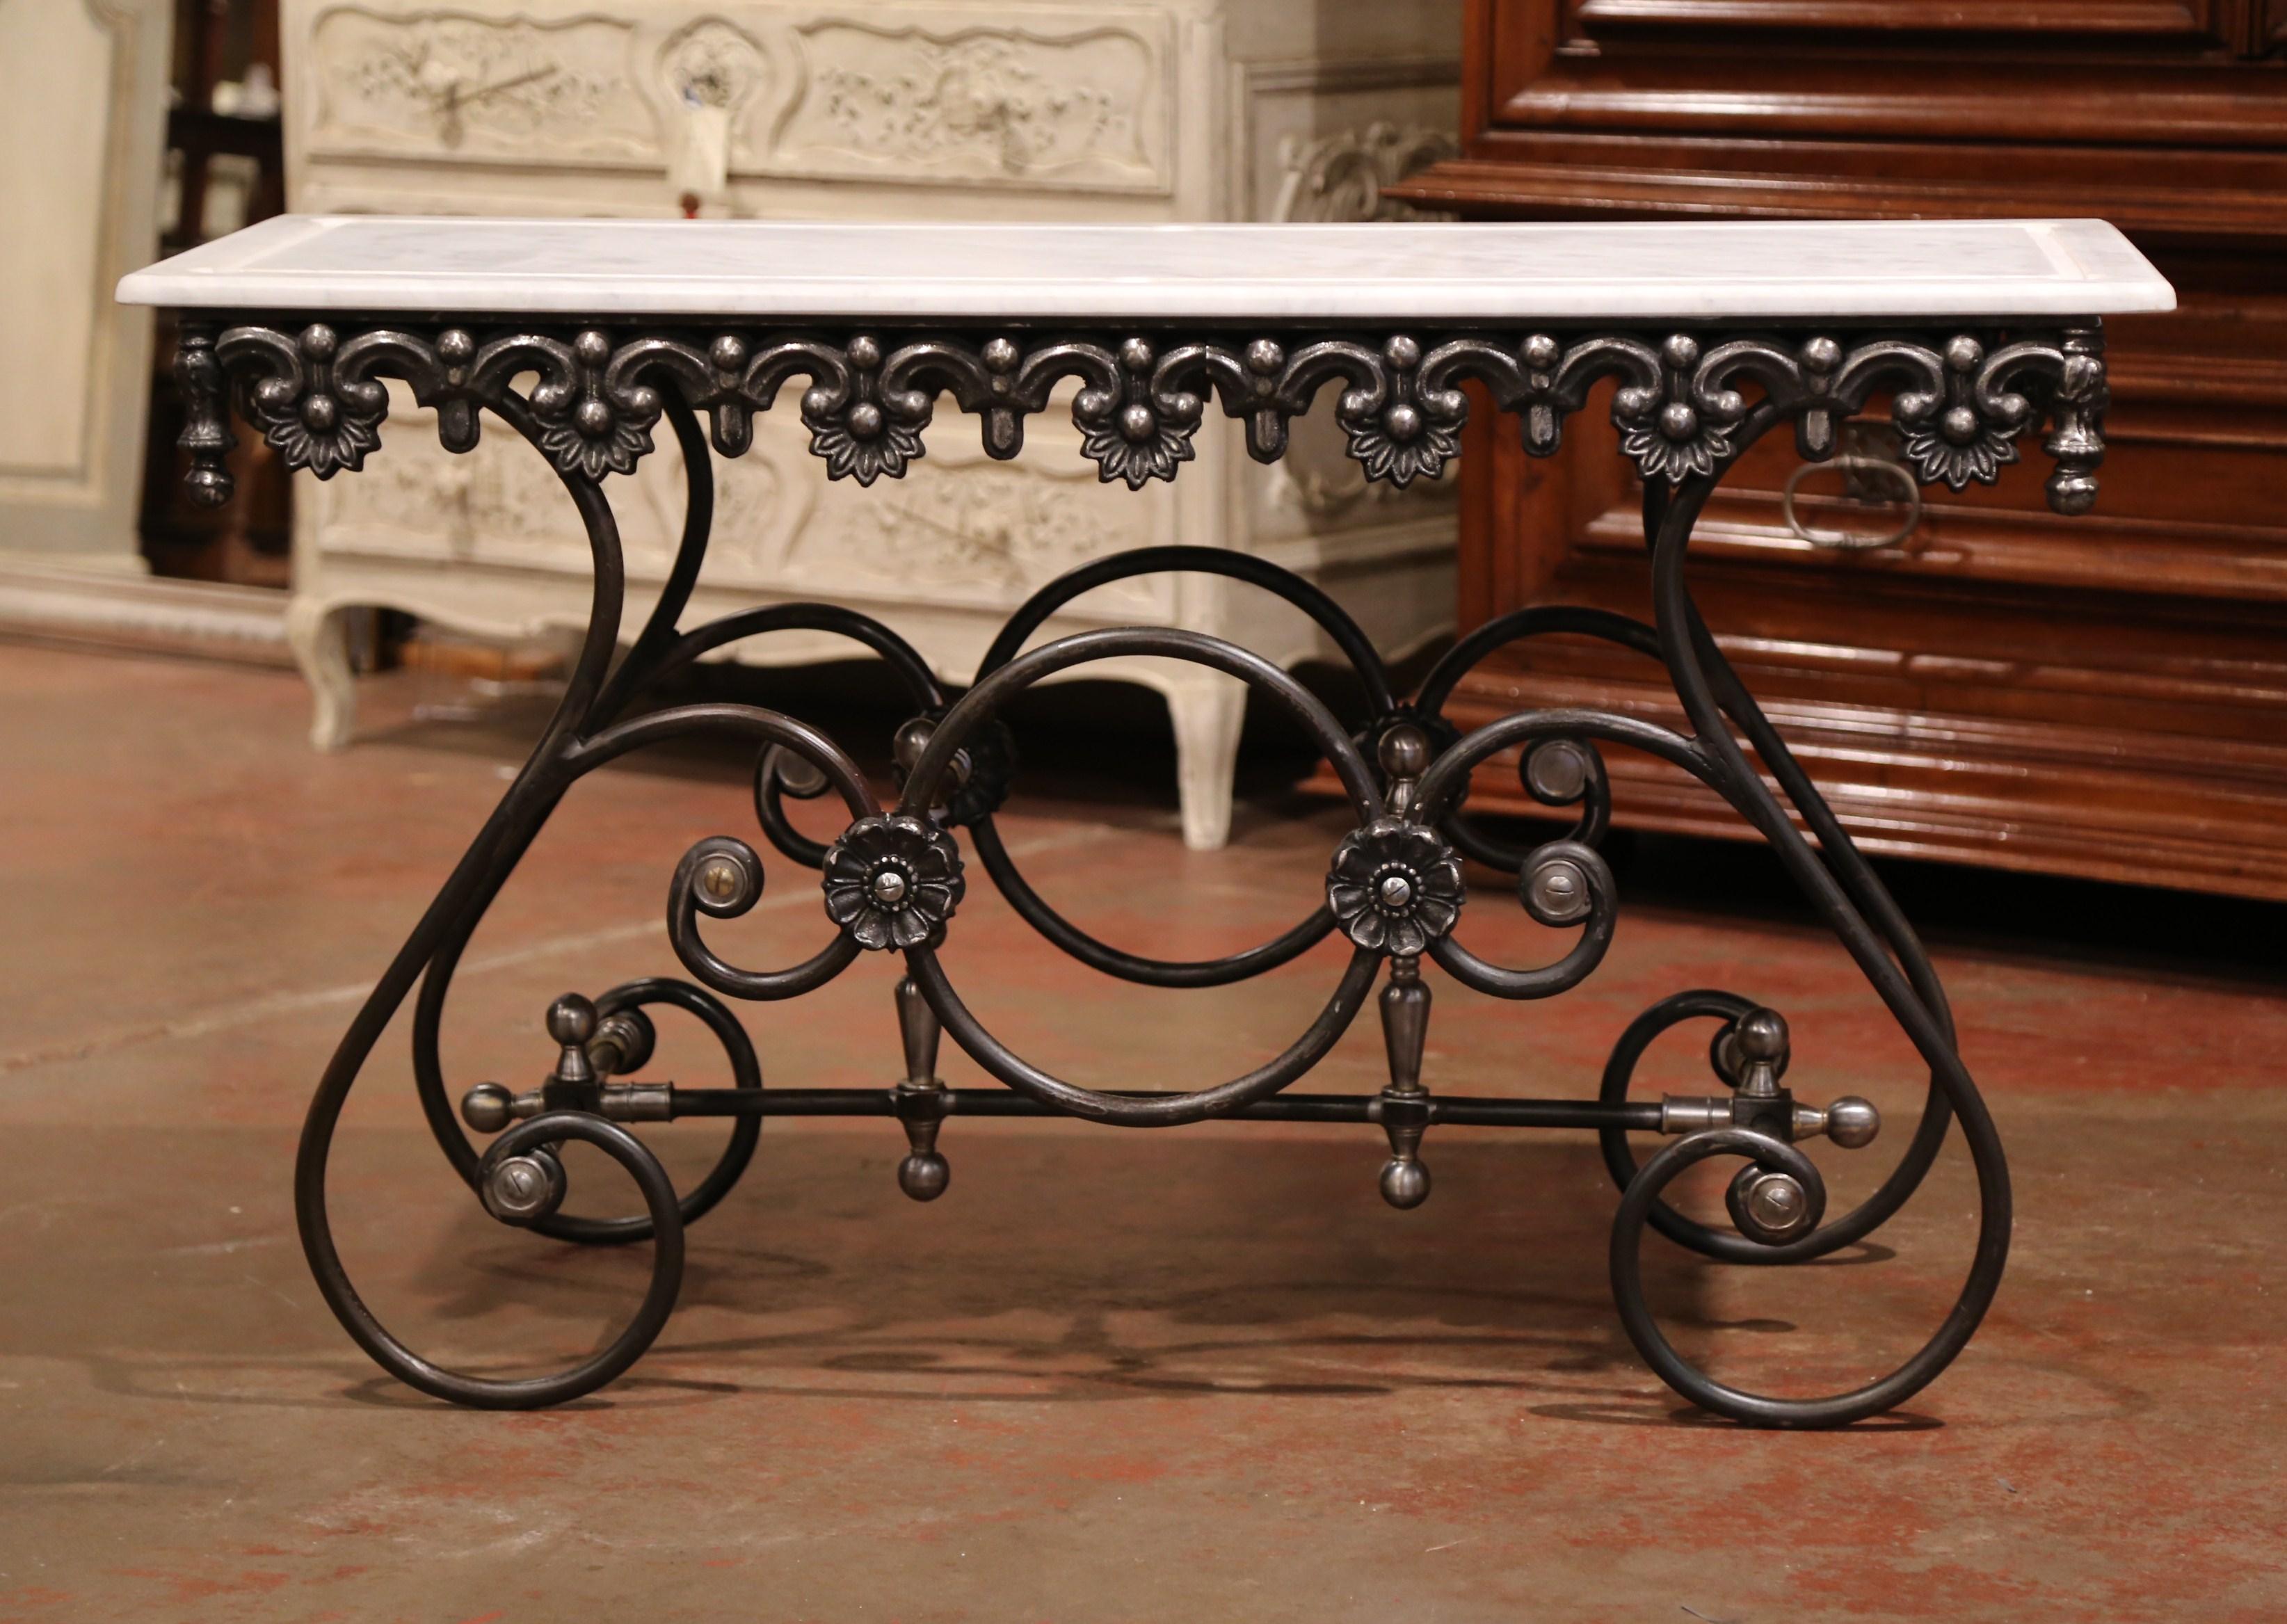 This long, narrow French butcher table (or pastry table) would add the ideal amount of surface space to any kitchen. Crafted of iron in France, this table features a scalloped apron with intricate metal work and beautiful scrolled legs with round